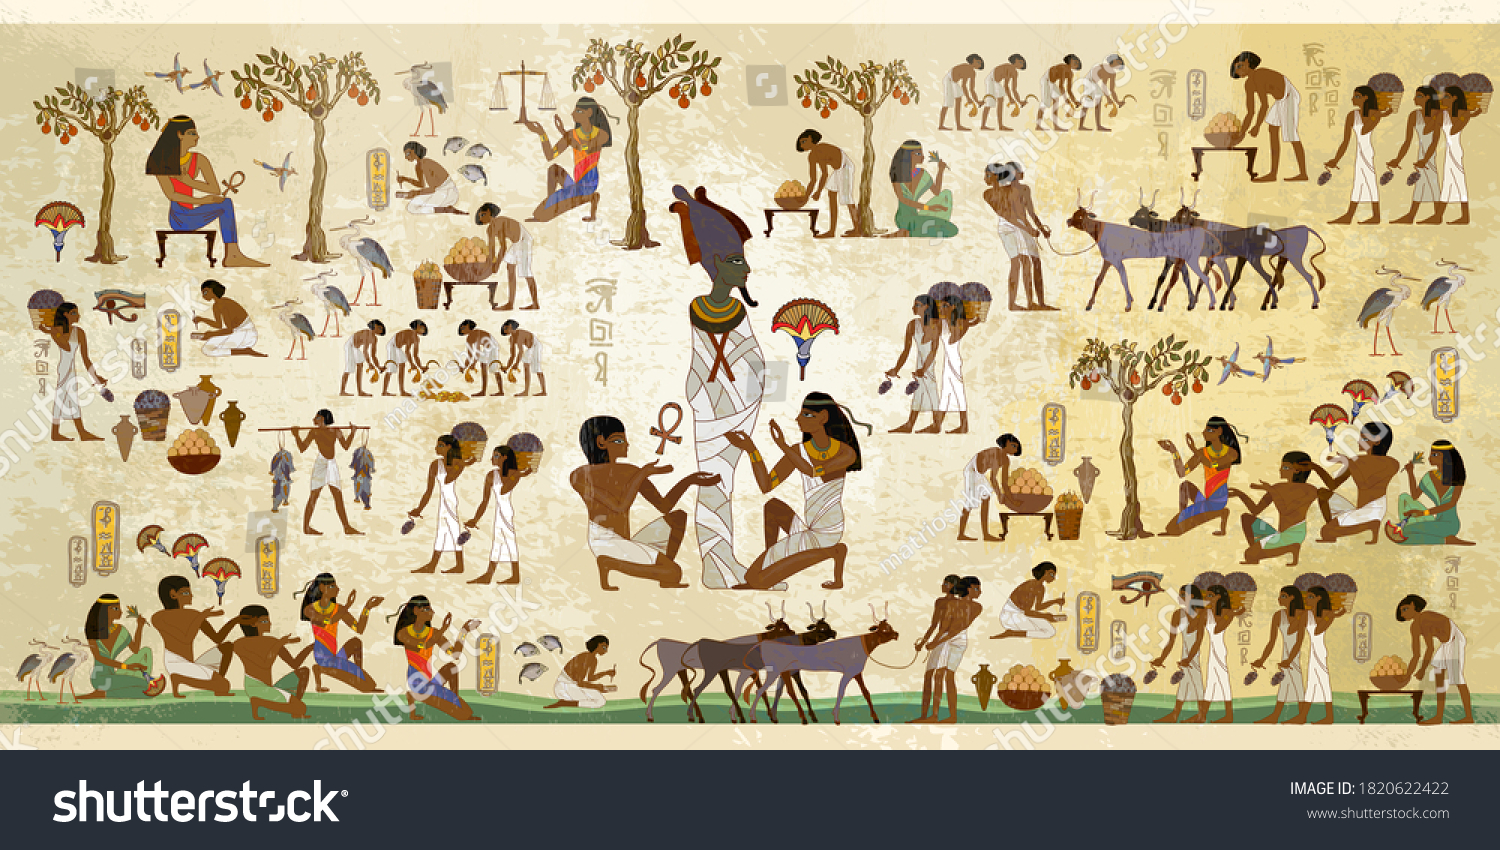 Life in ancient Egypt, frescoes. Egyptians history art. Hieroglyphic carvings on exterior walls of an old temple. Agriculture, workmanship, fishery, farm  #1820622422